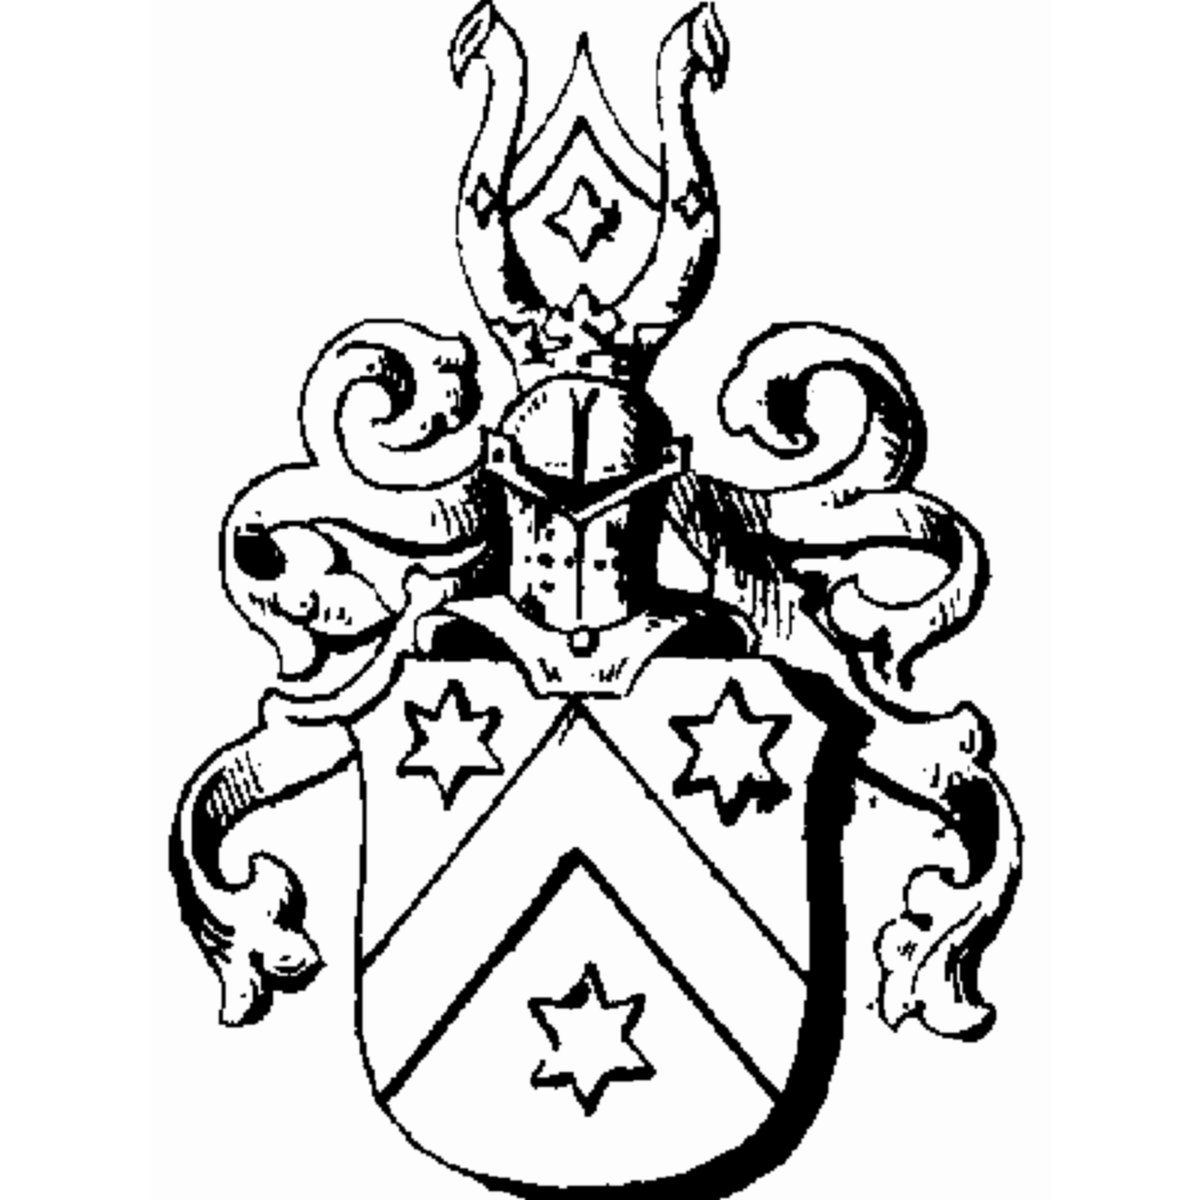 Coat of arms of family Pastor